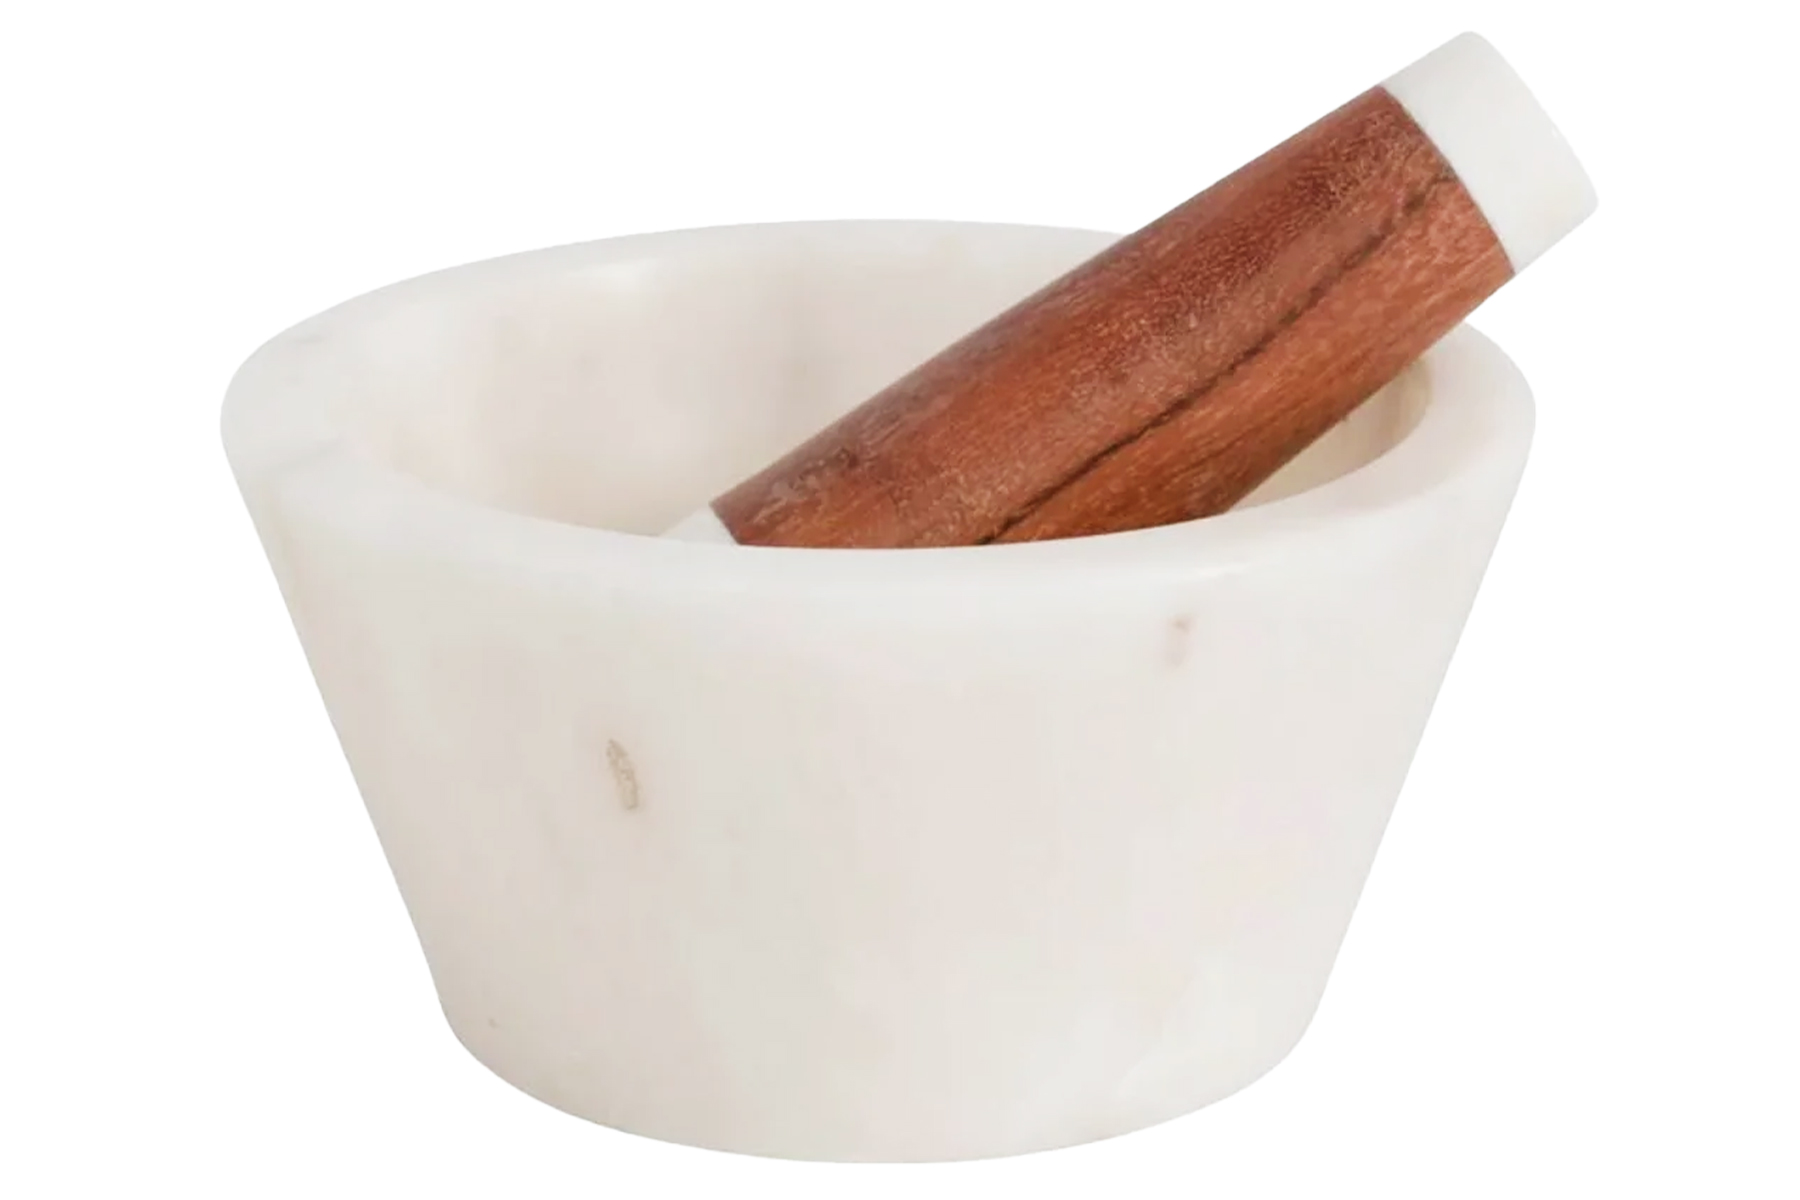 marble acacia wood mortar set from favor the kind